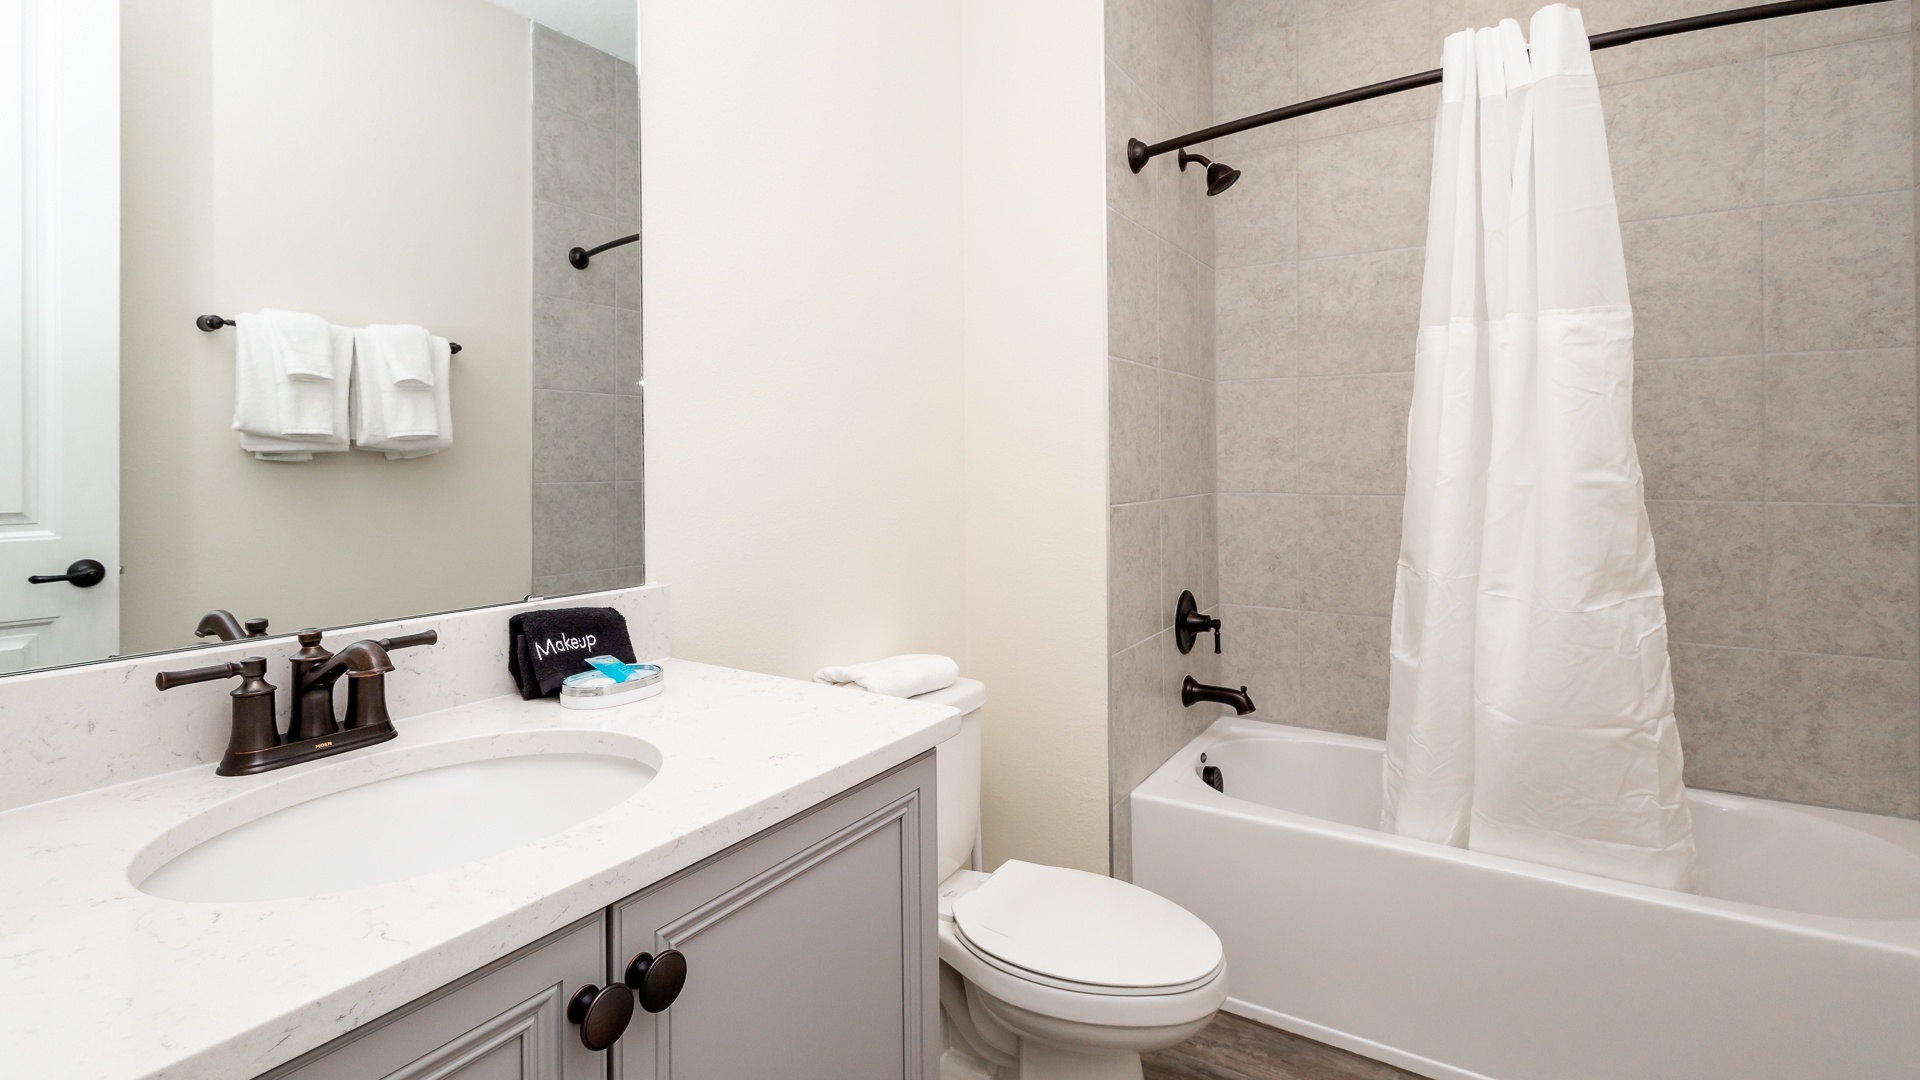 This 2nd floor full bathroom offers a single vanity & shower/tub combo